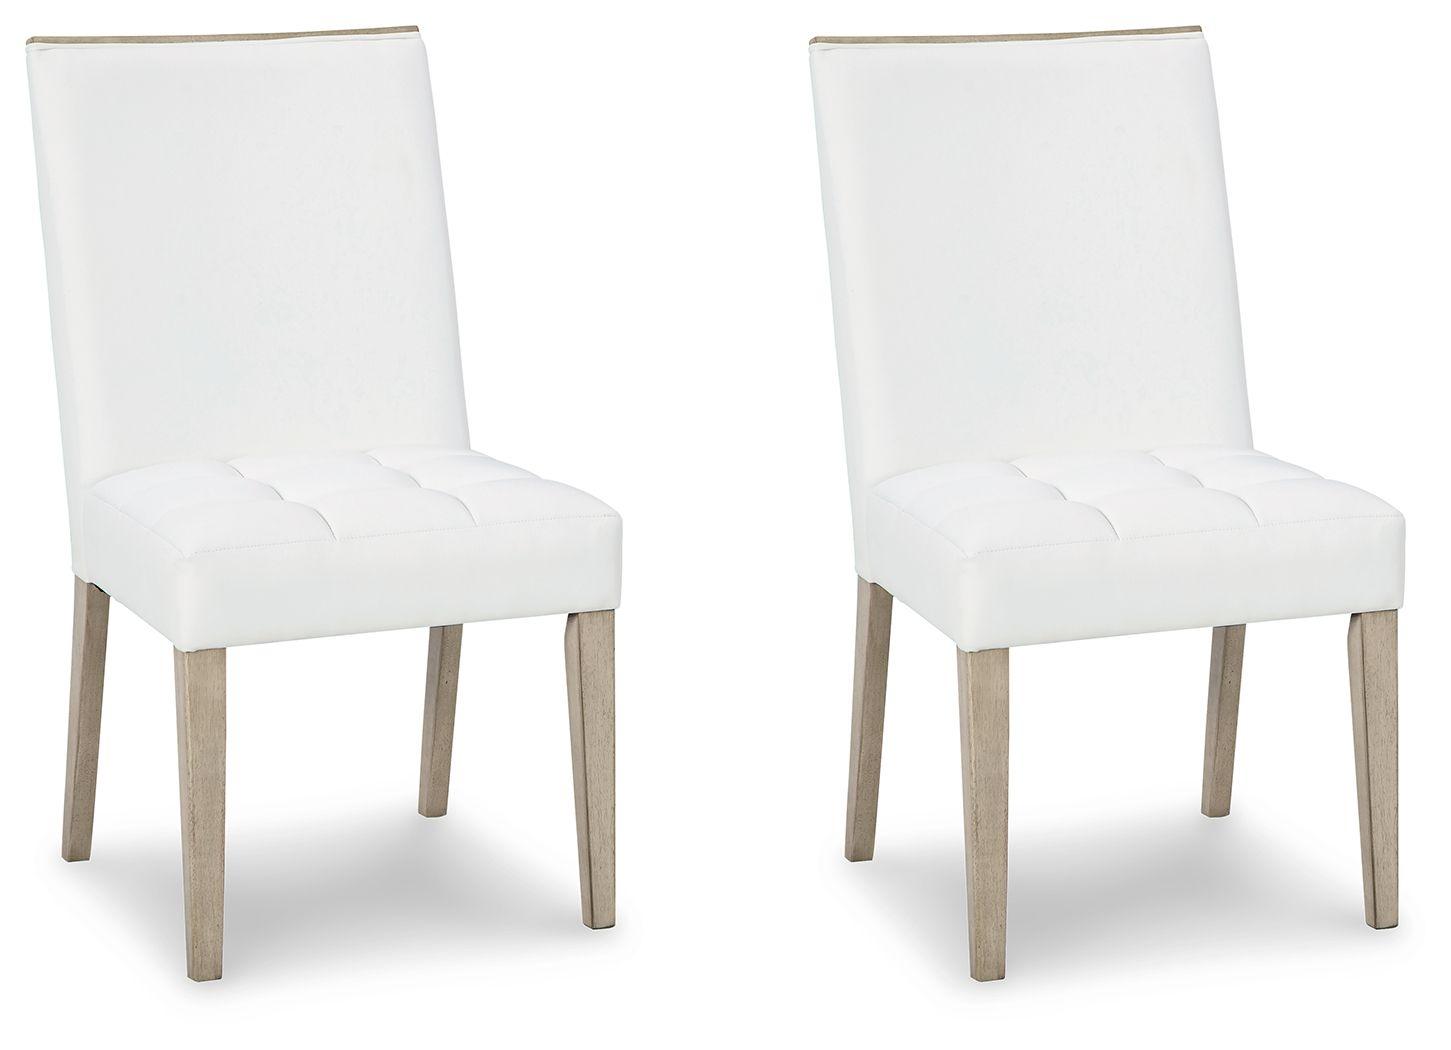 Signature Design by Ashley® - Wendora - Bisque / White - Dining Uph Side Chair (Set of 2) - 5th Avenue Furniture